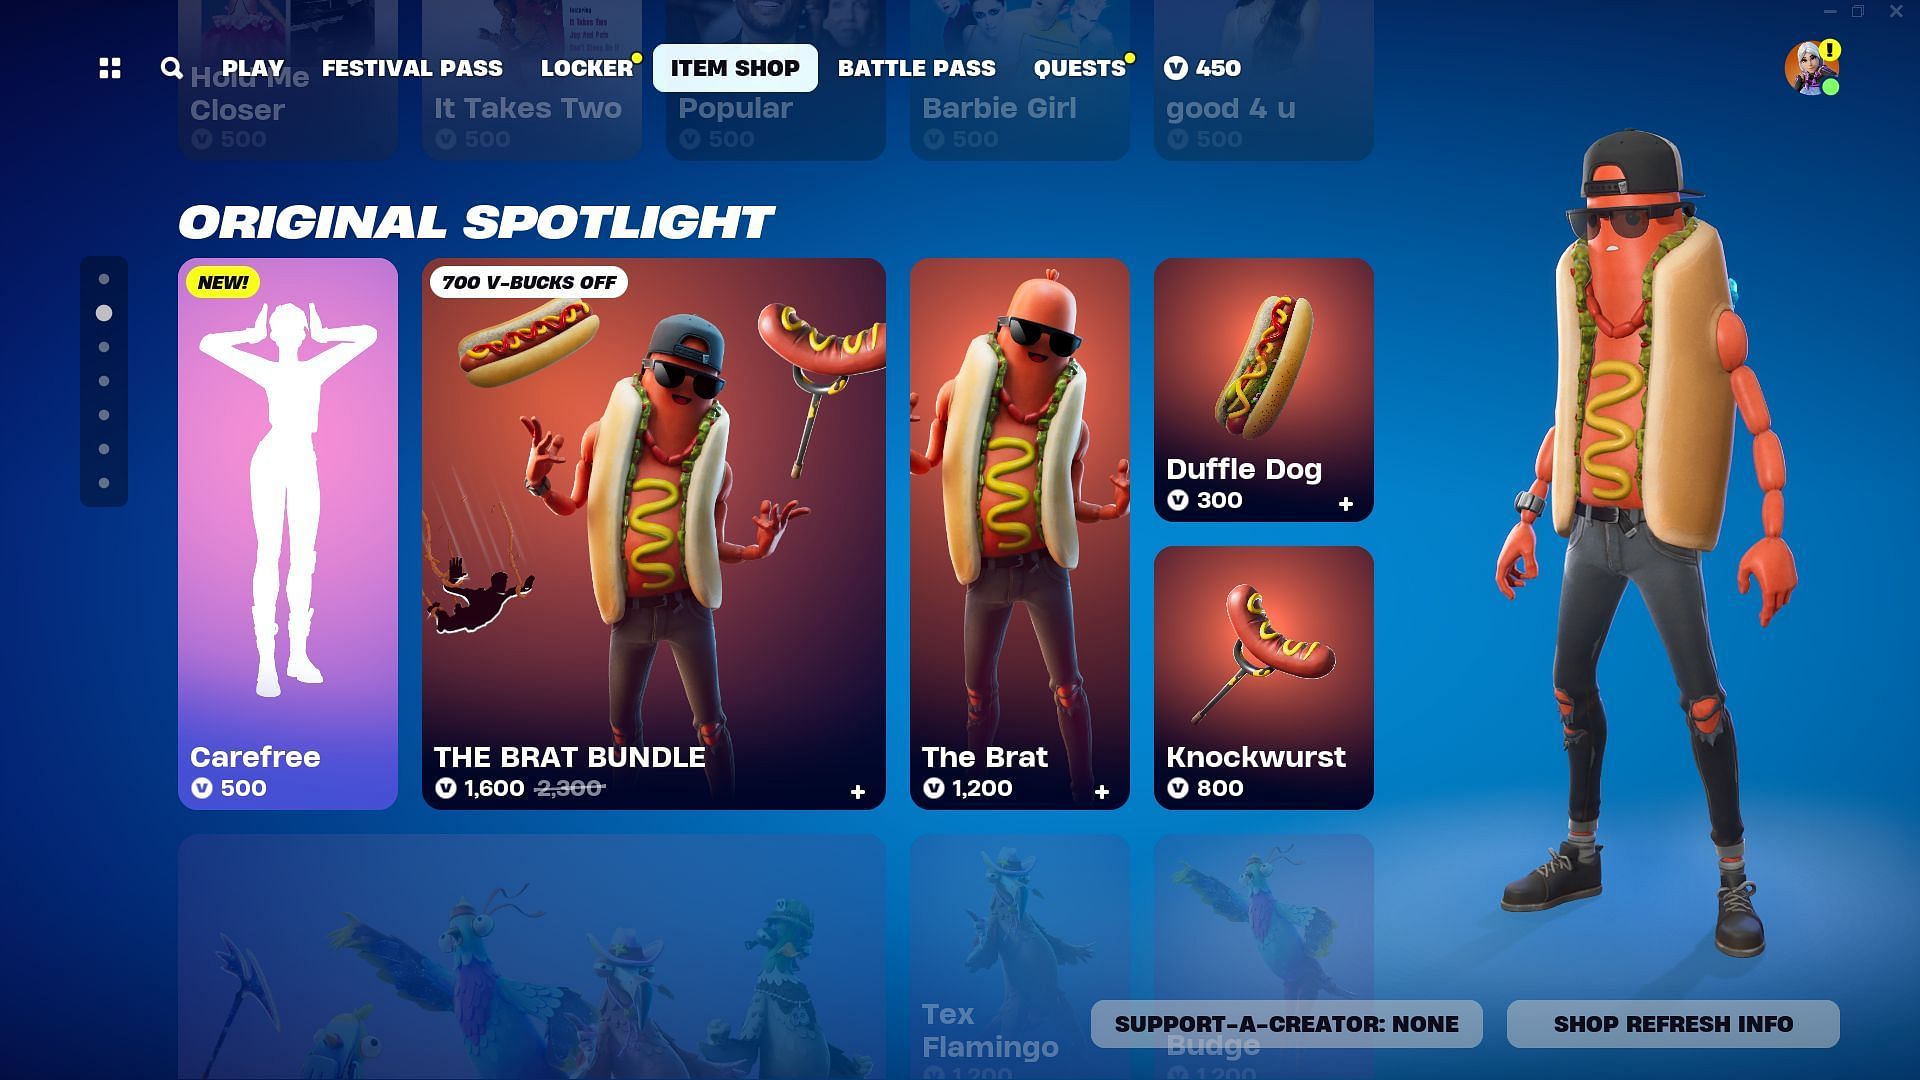 The Brat Bundle is currently listed in the Item Shop (Image via Epic Games/Fortnite)